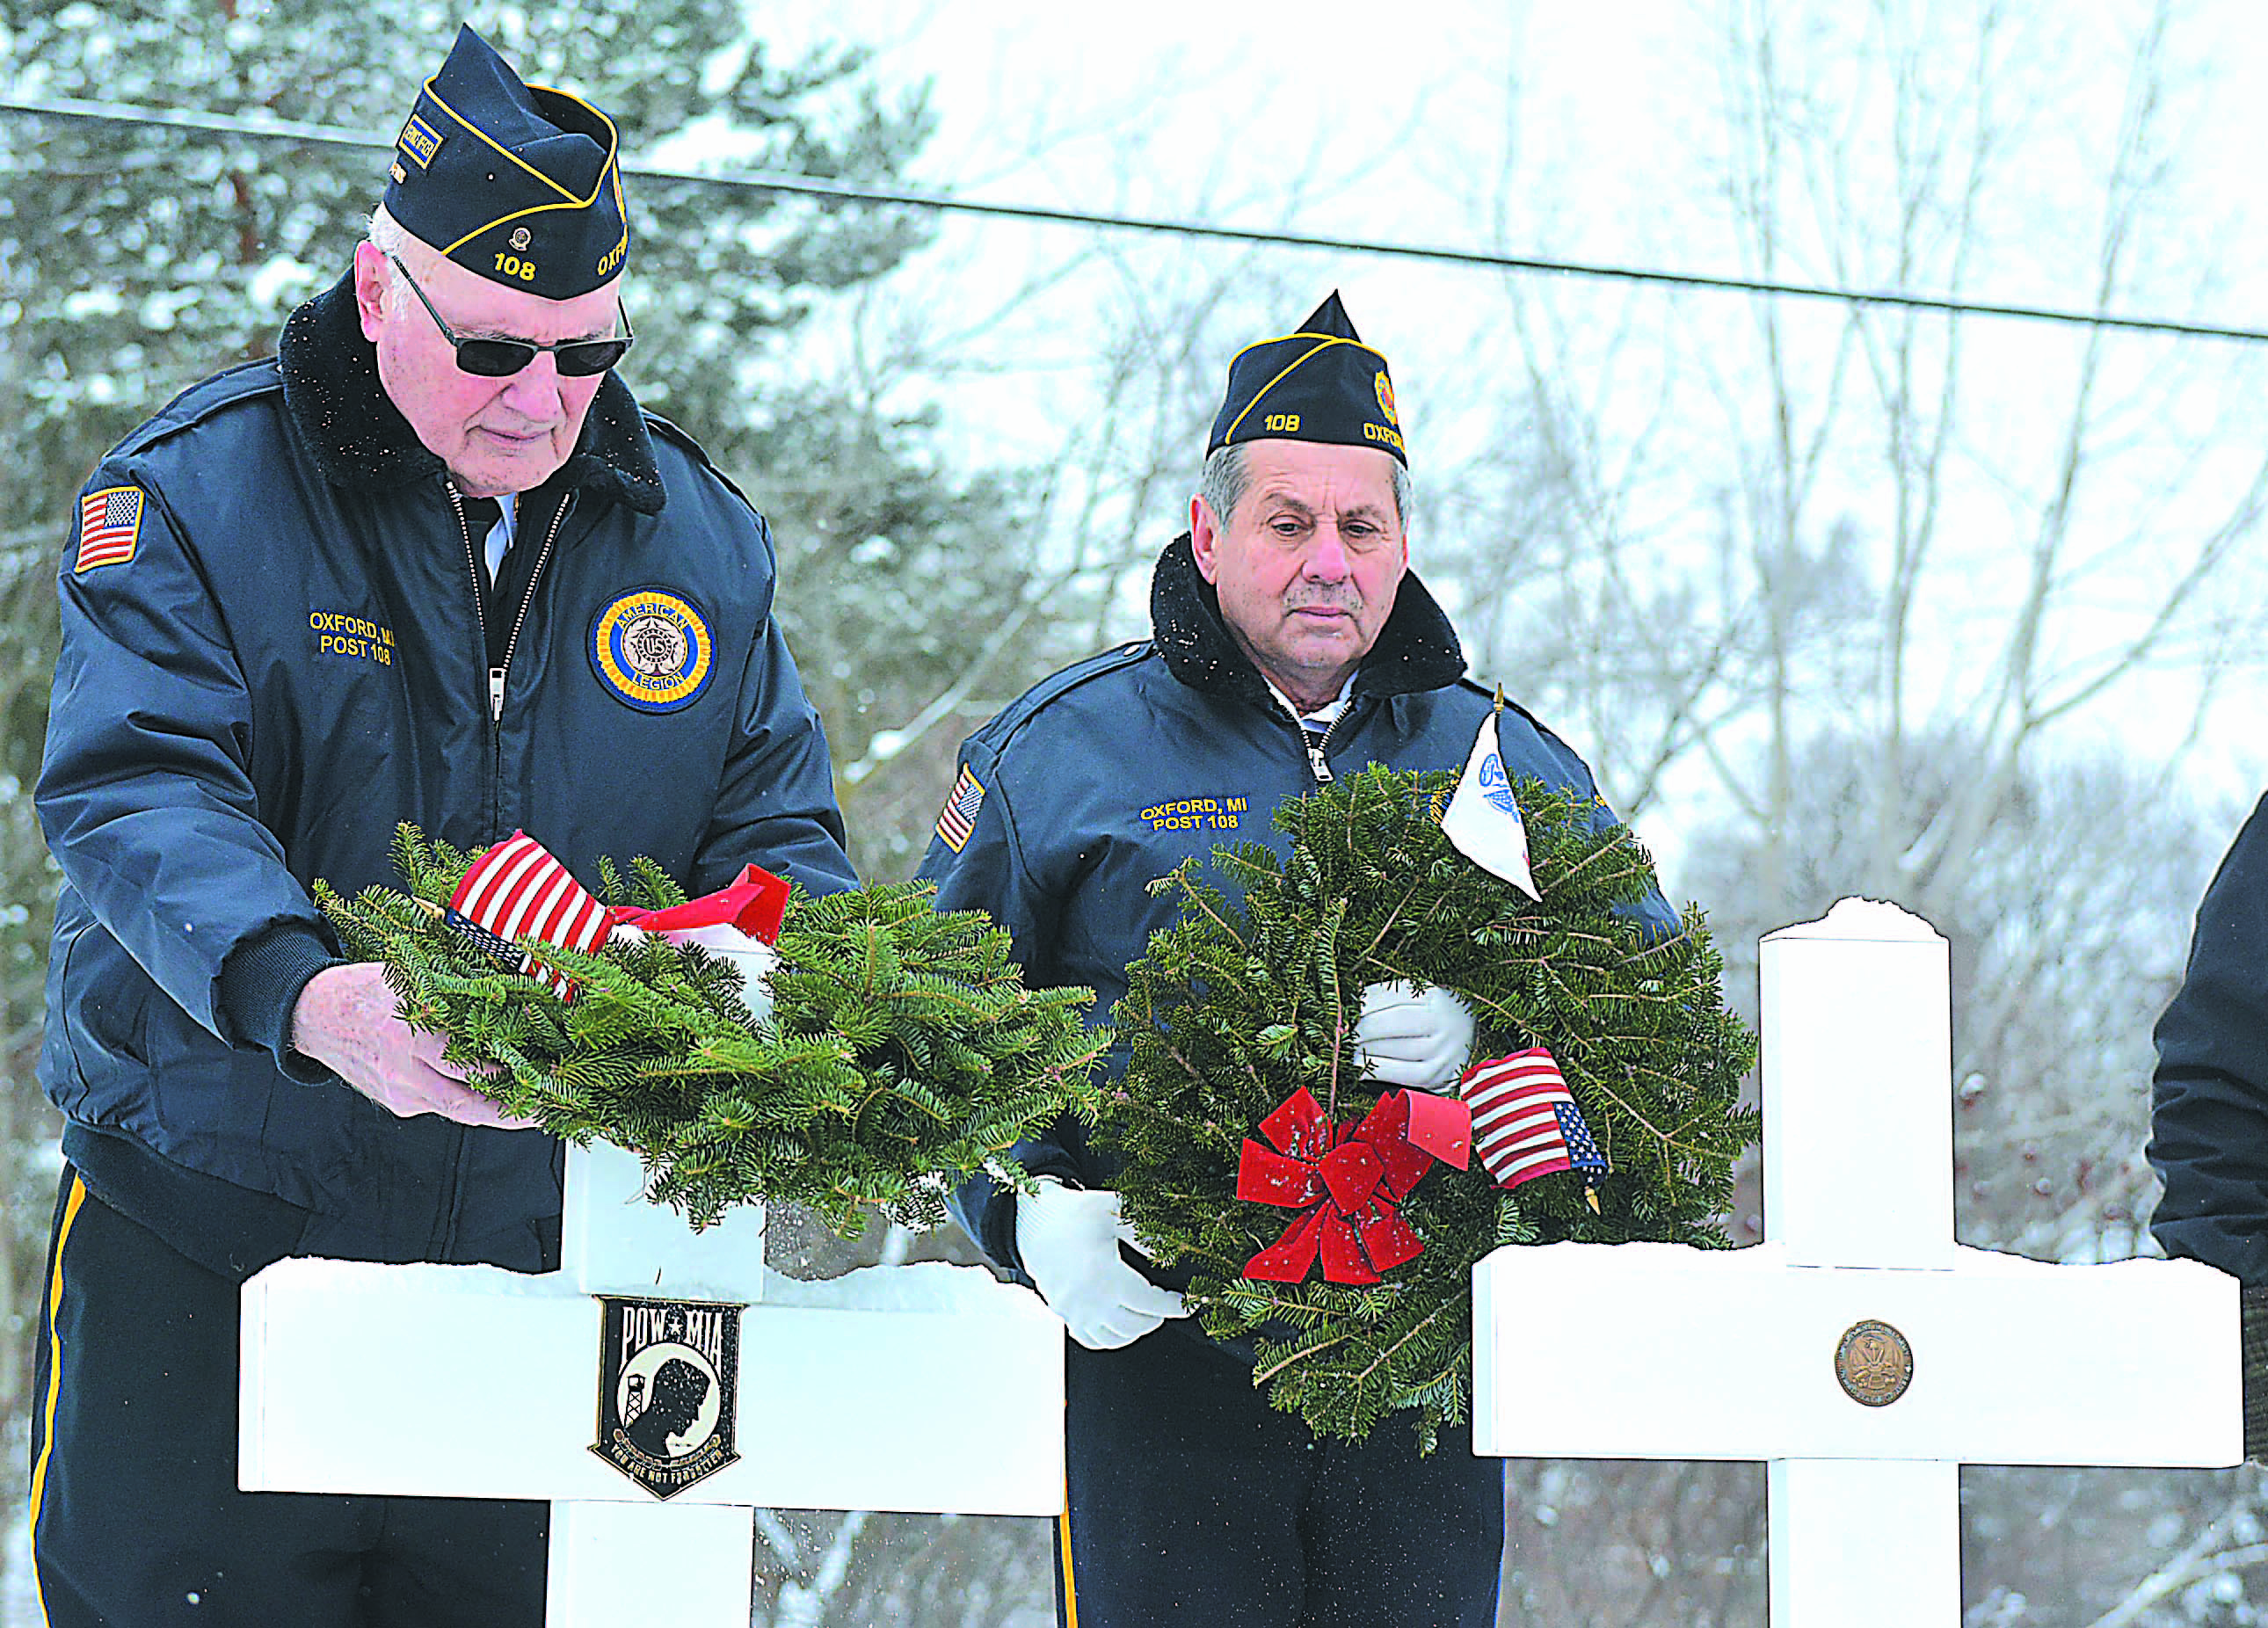 James Montgomery (left) places a wreath on a cross representing service members whose last known status was either prisoner of war or missing in action. Watching him is Vietnam veteran Juan Vazquez.